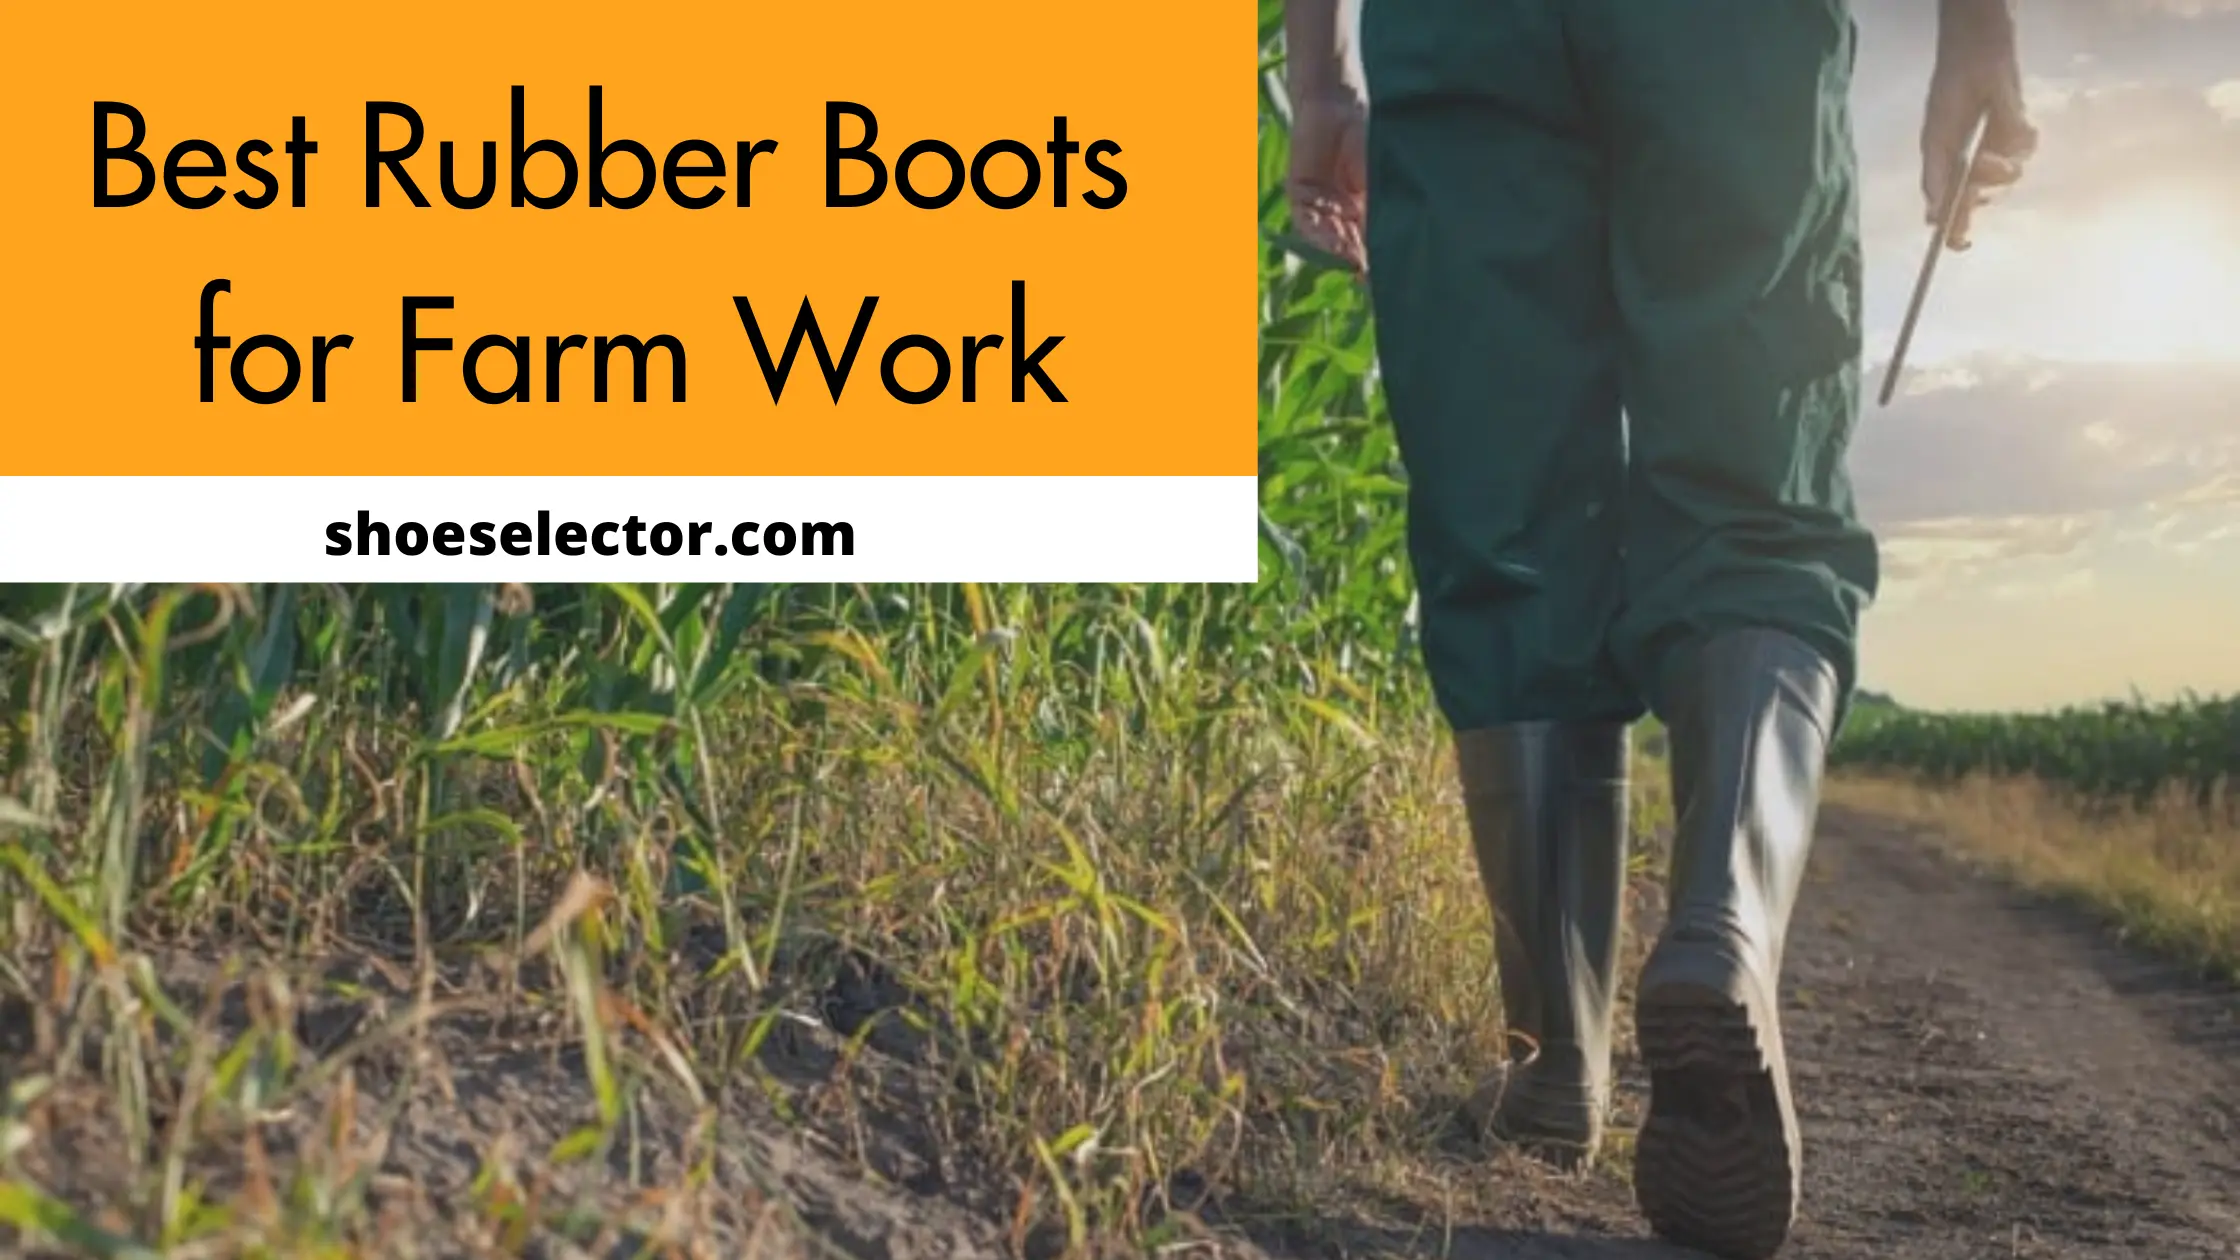 Best Rubber Boots For Farm Work - Expert's Choice